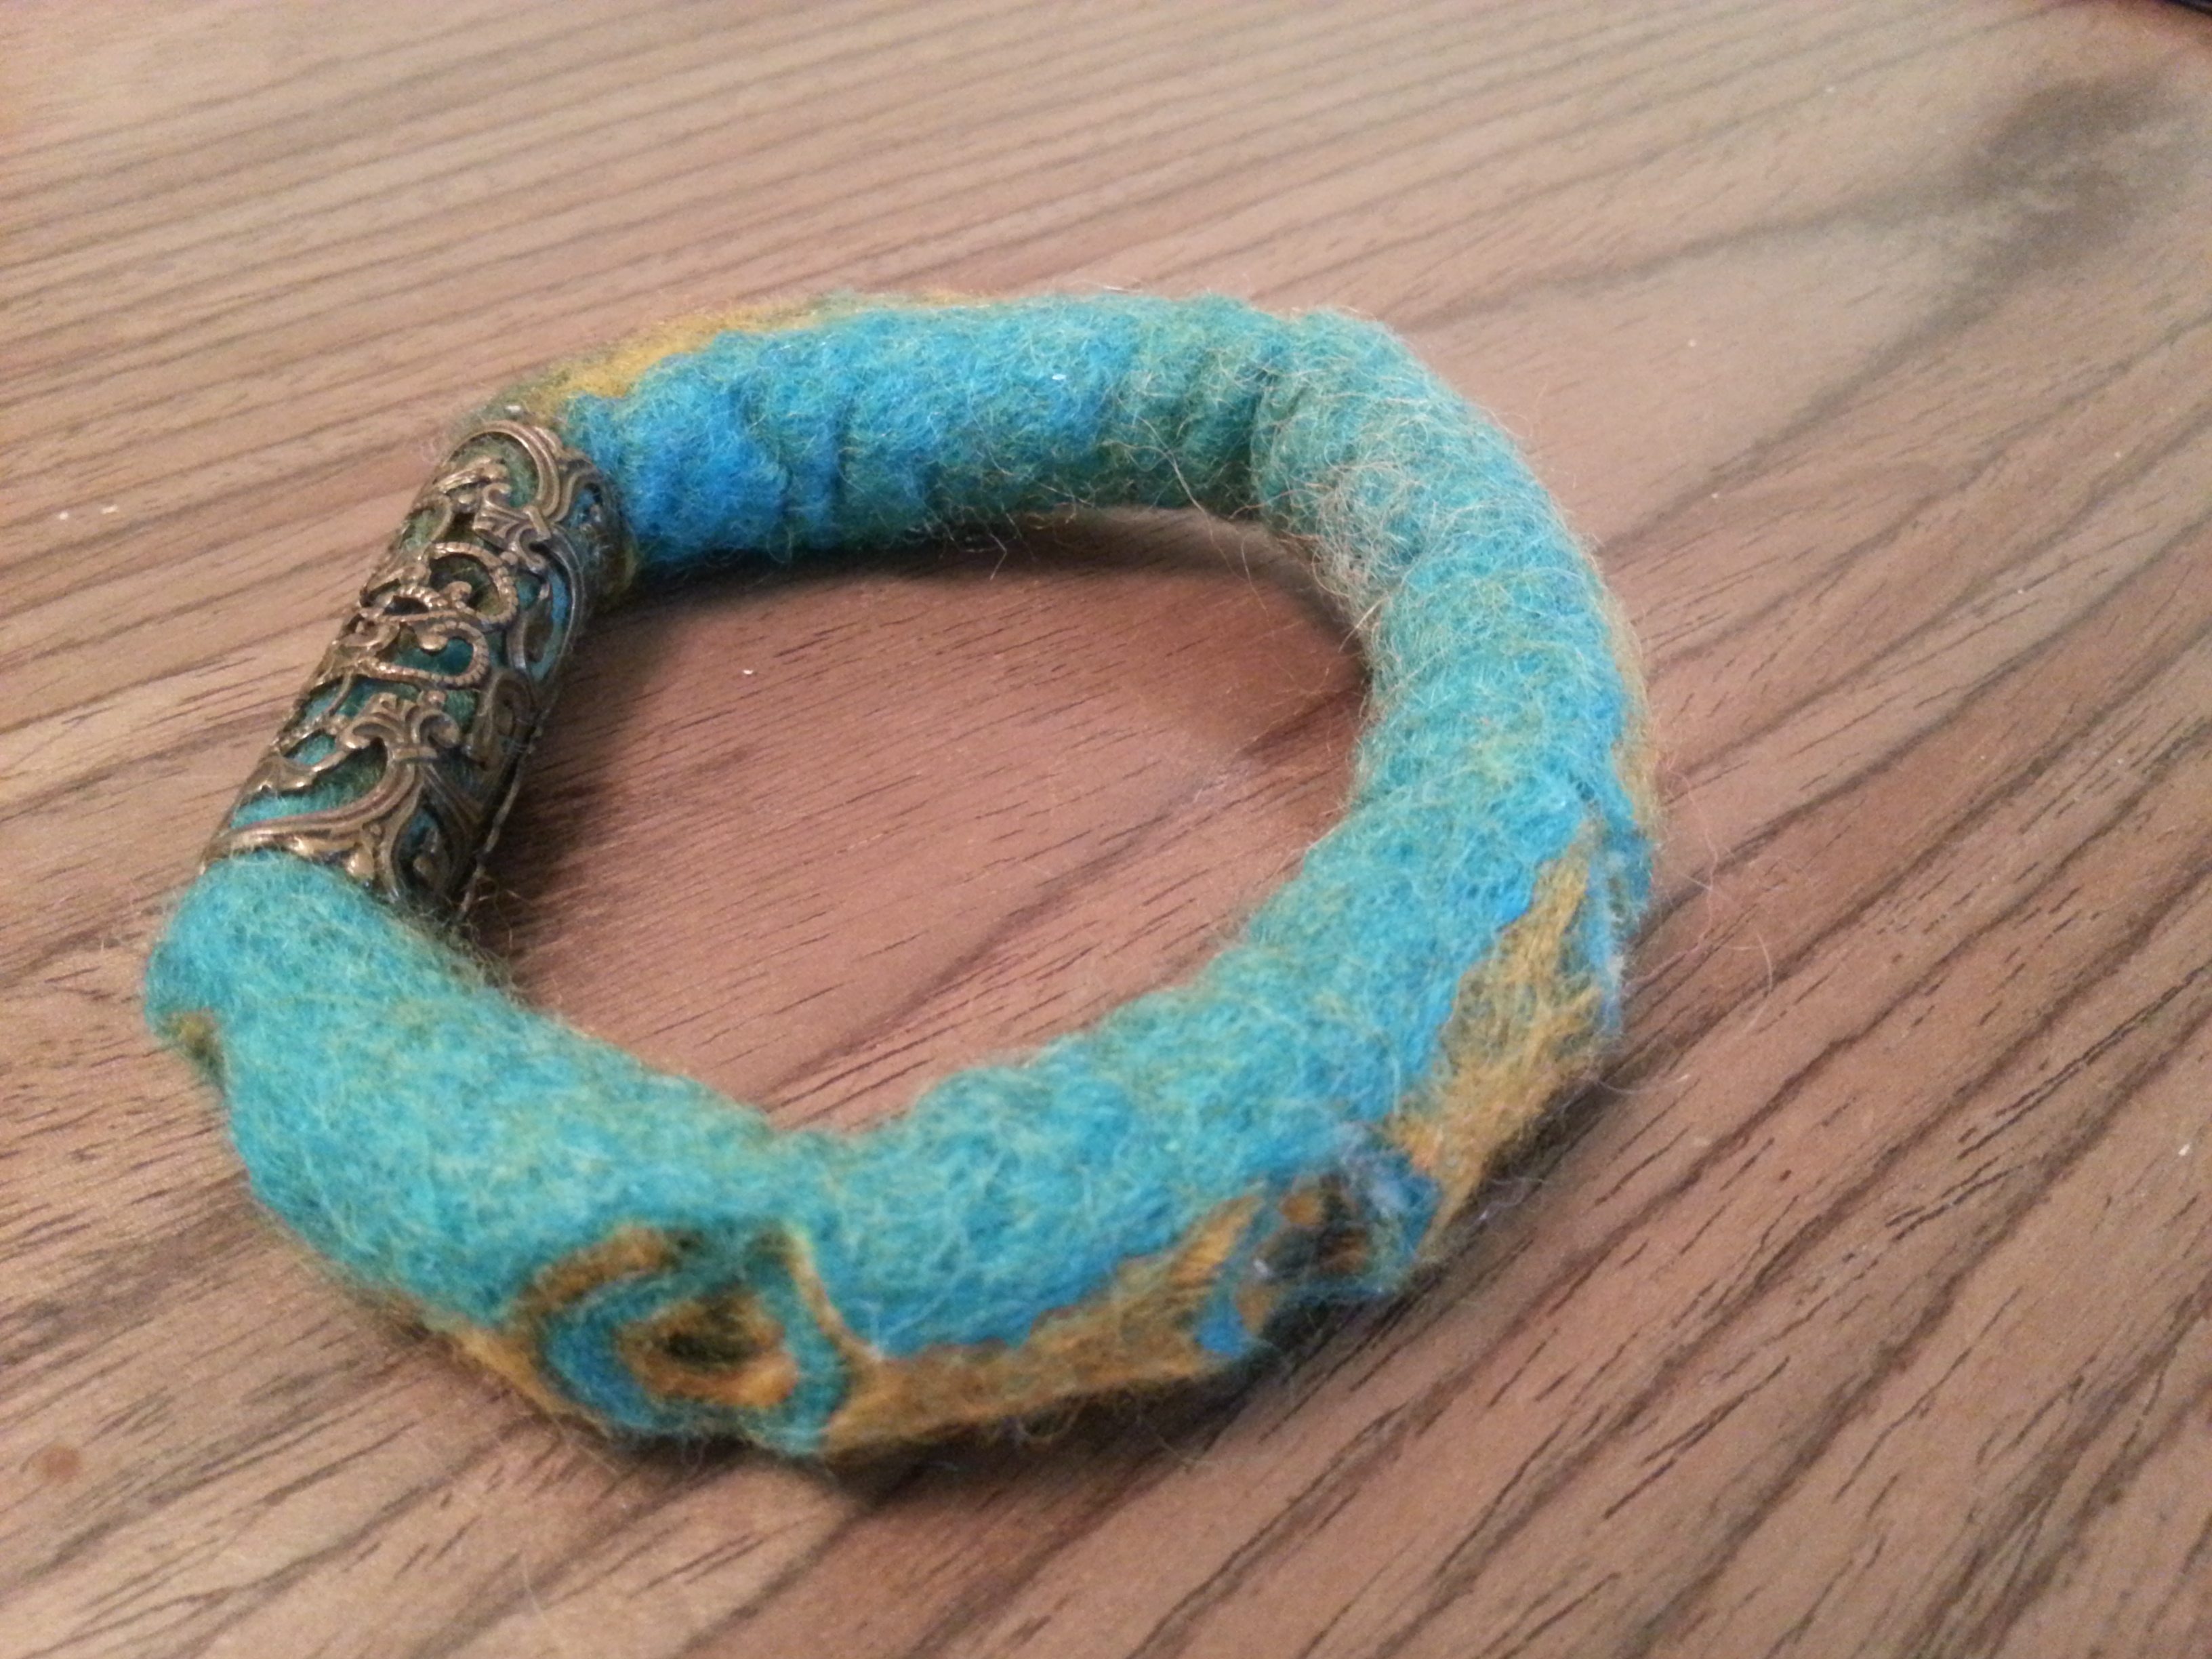 Making Felted Jewellery